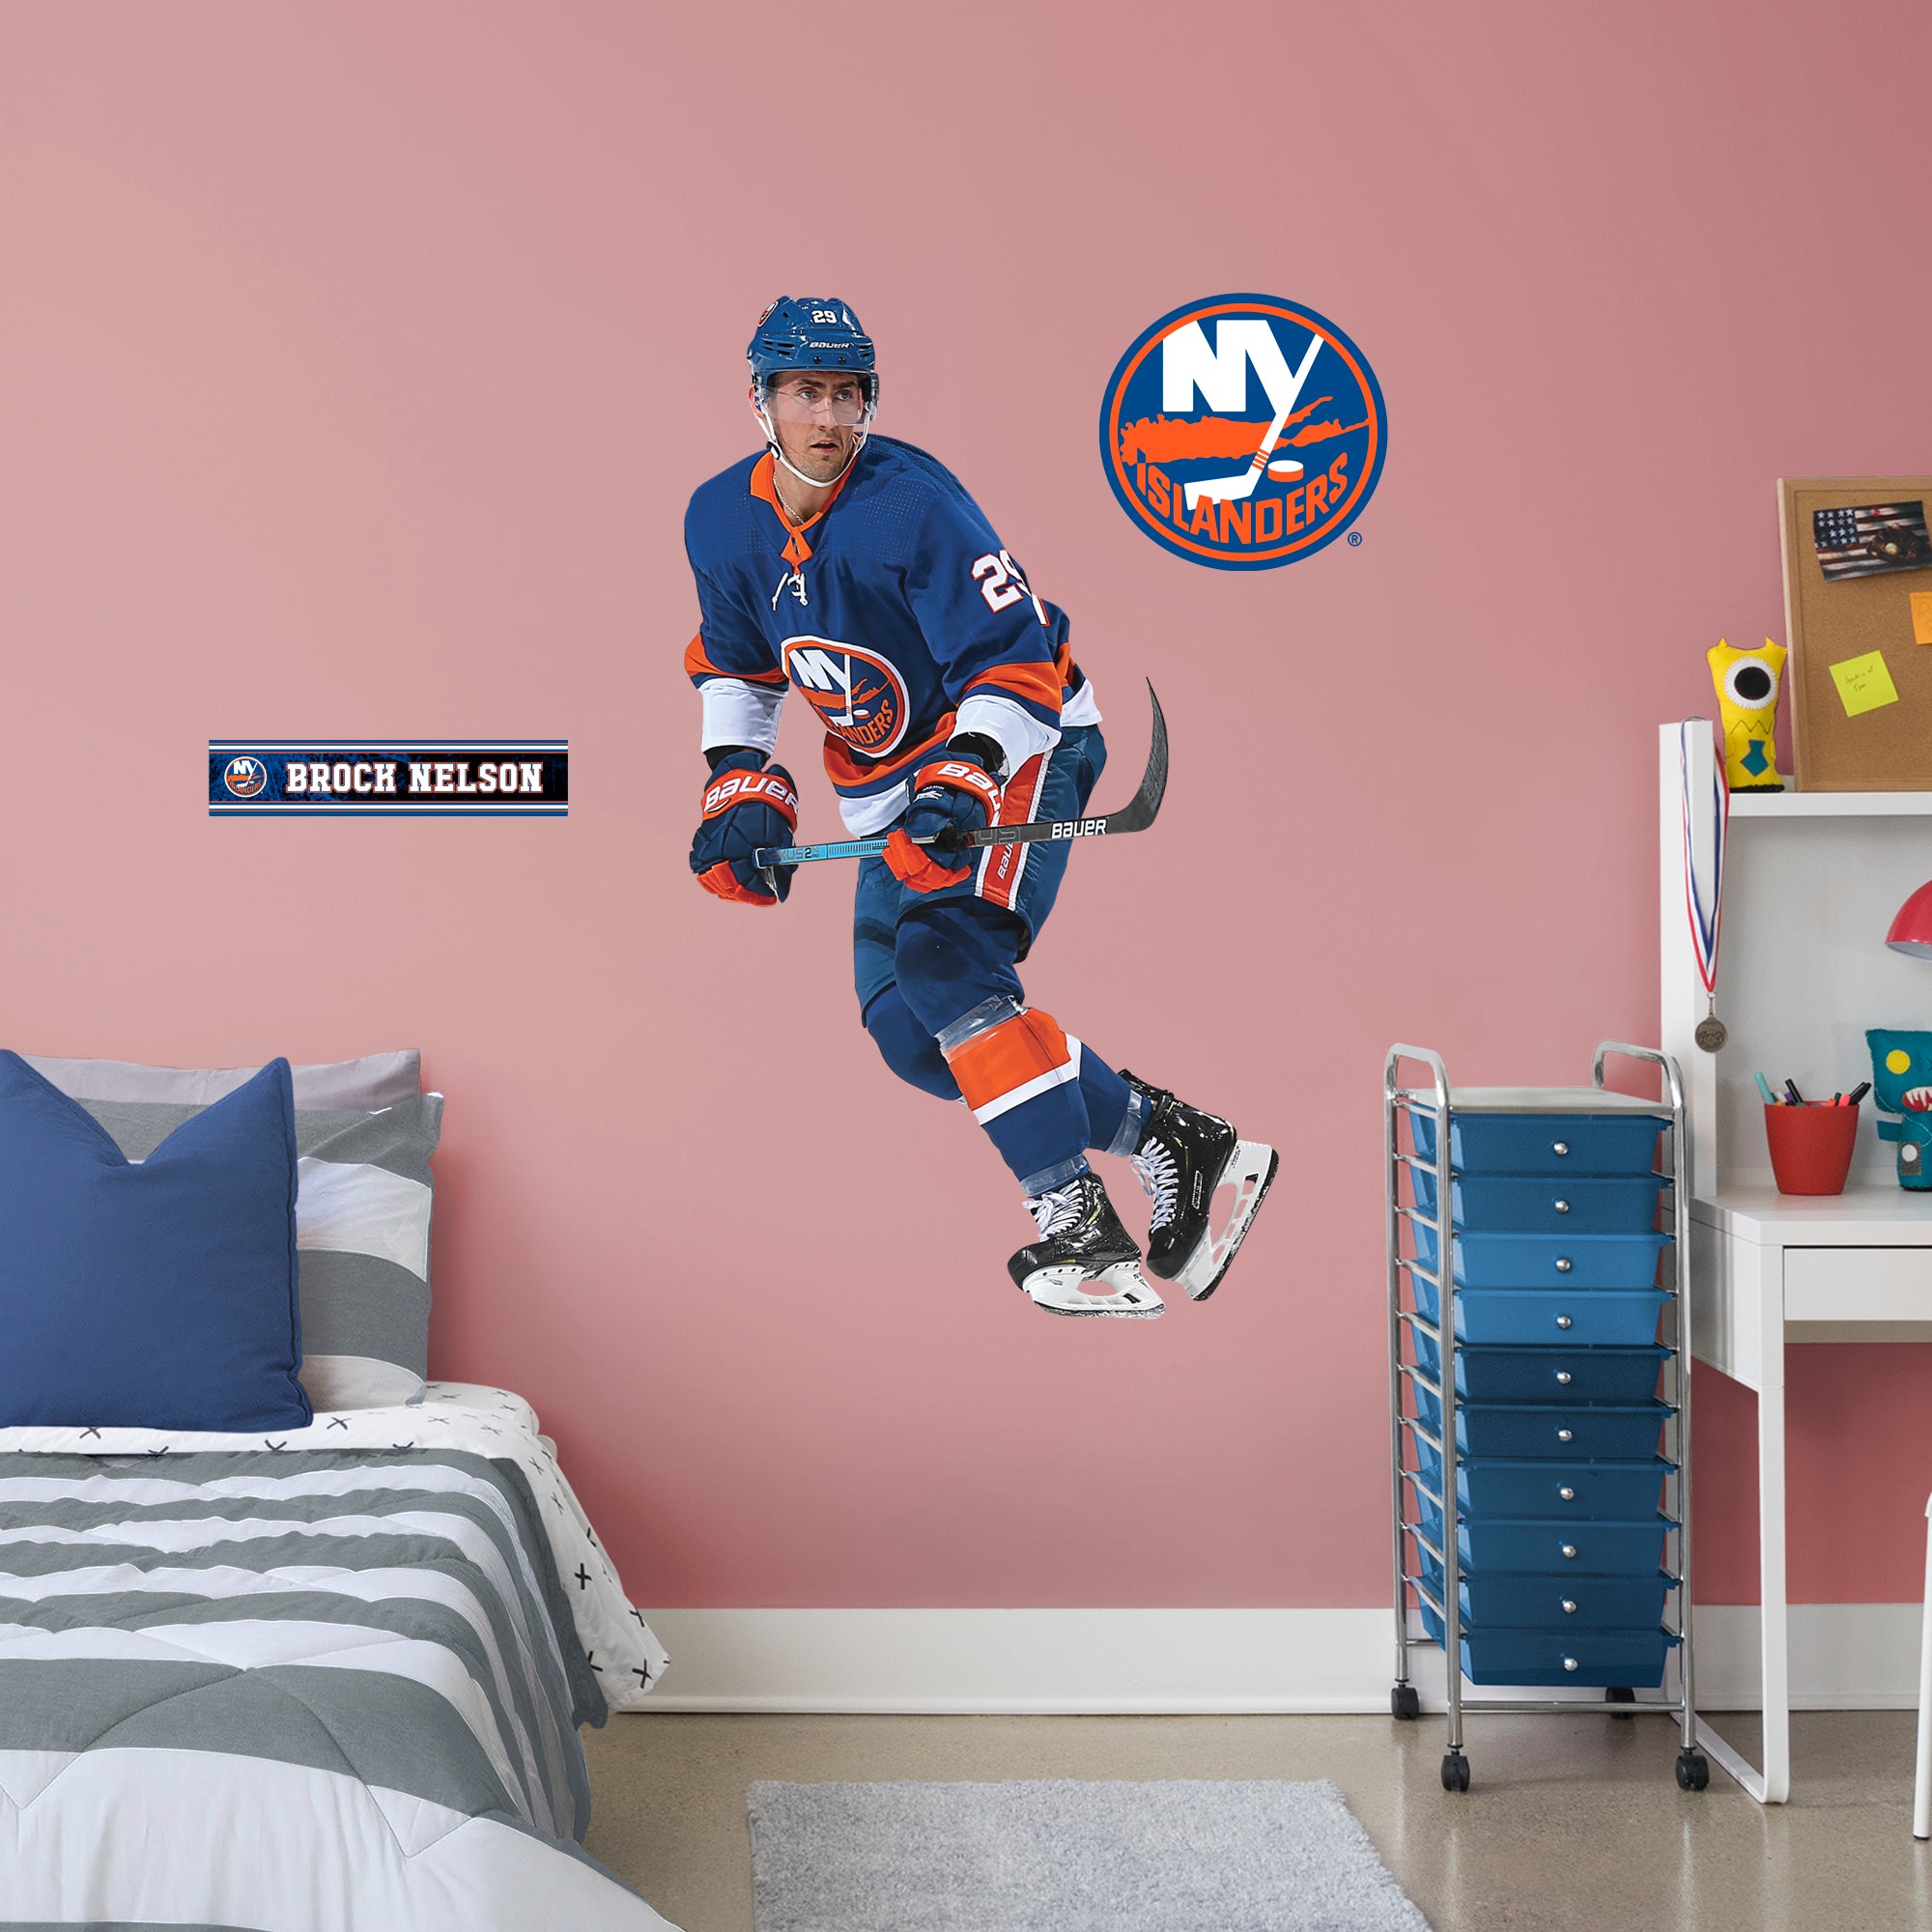 Brock Nelson for New York Islanders: RealBig Officially Licensed NHL Removable Wall Decal Giant Athlete + 2 Decals (33.5"W x 51"